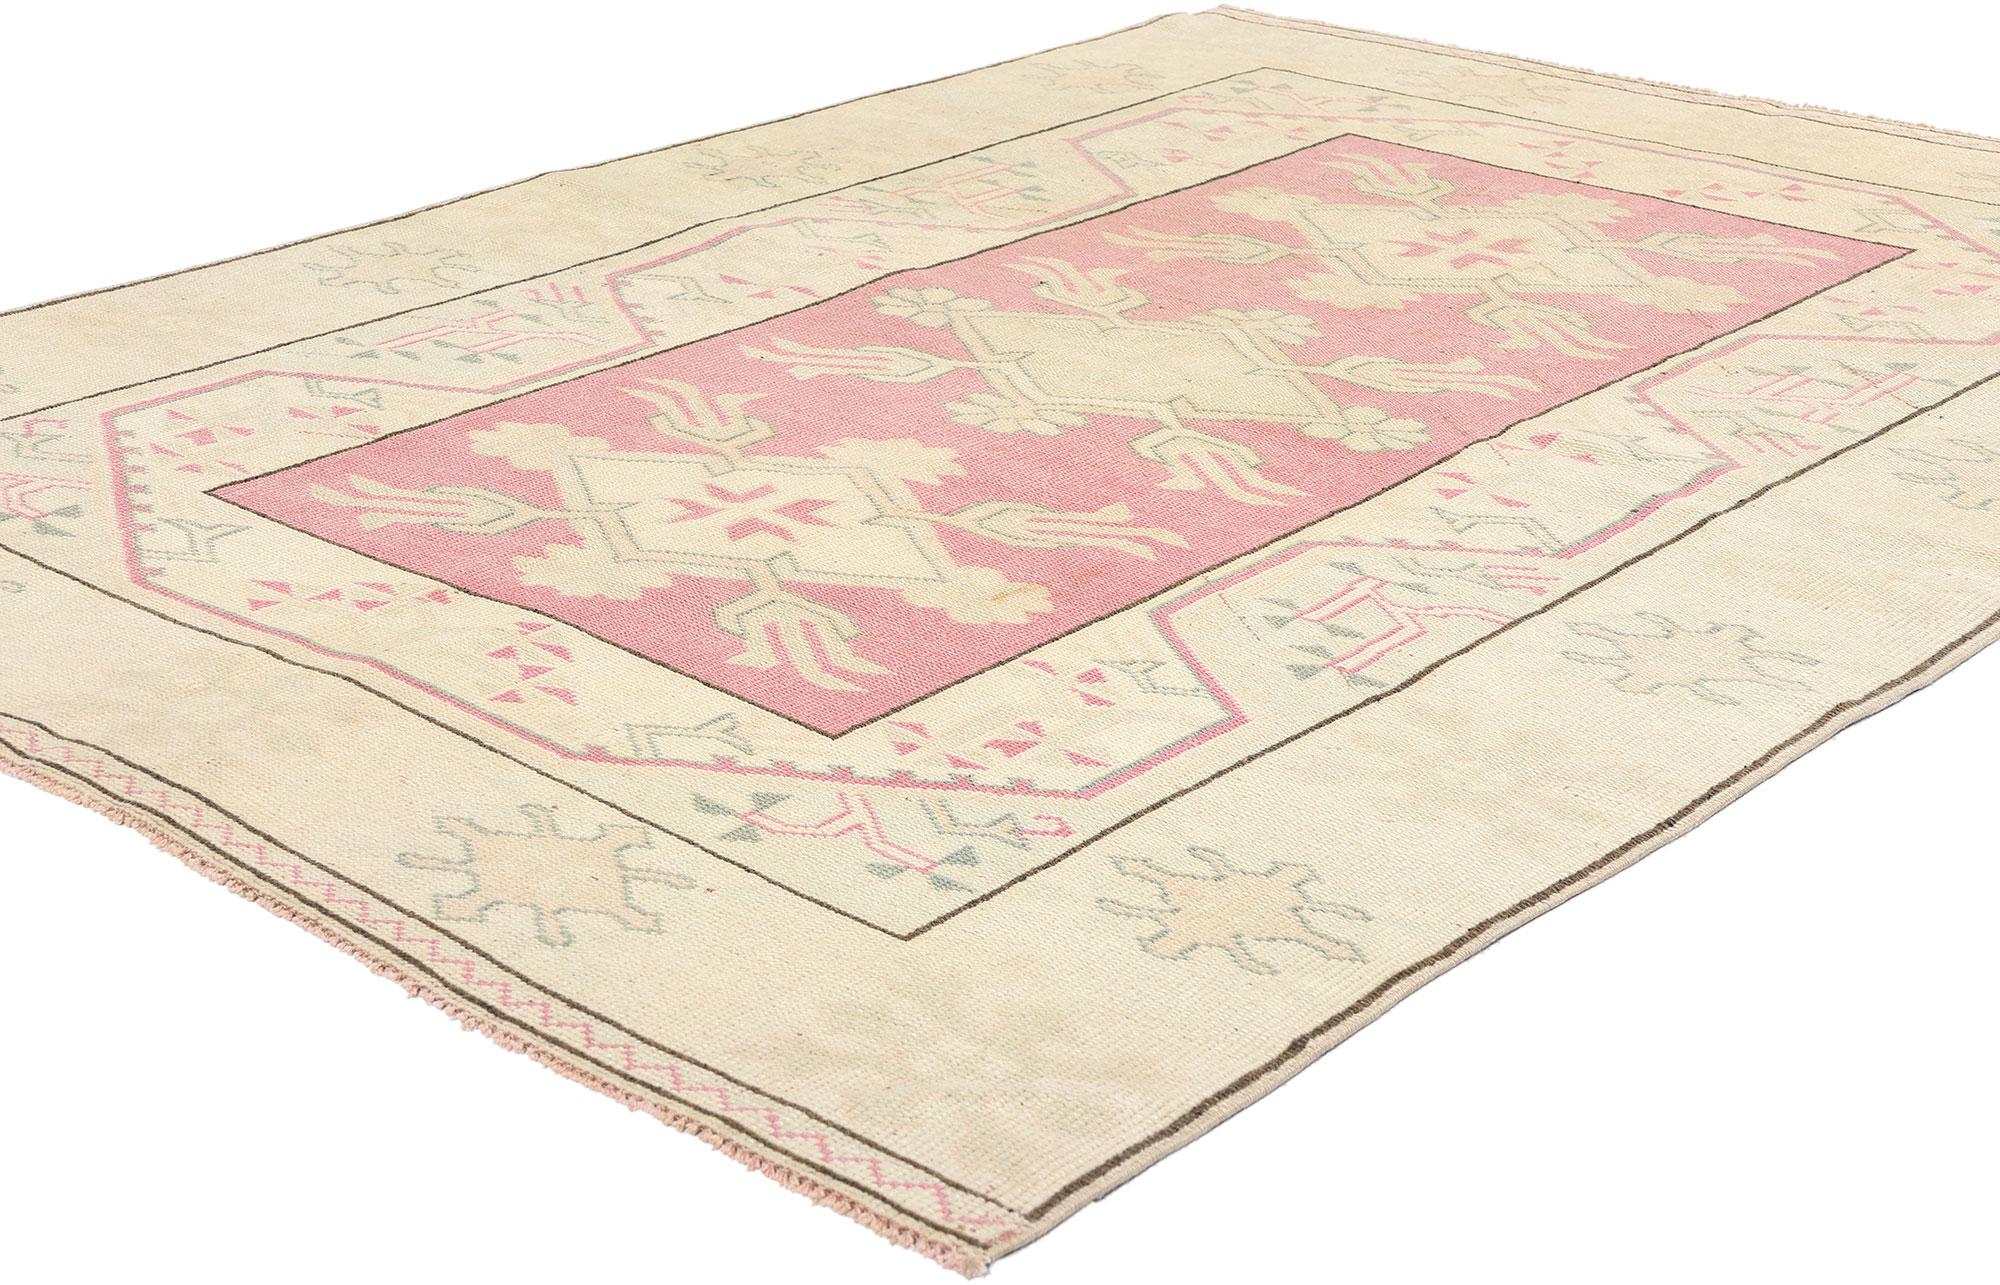 53934 Vintage Pink Turkish Oushak Rug, 05'00 x 06'10. Antique-washed Turkish Oushak rugs undergo a special washing process to achieve a vintage aesthetic, characterized by soft, muted colors that mimic the natural fading of aged rugs. This technique